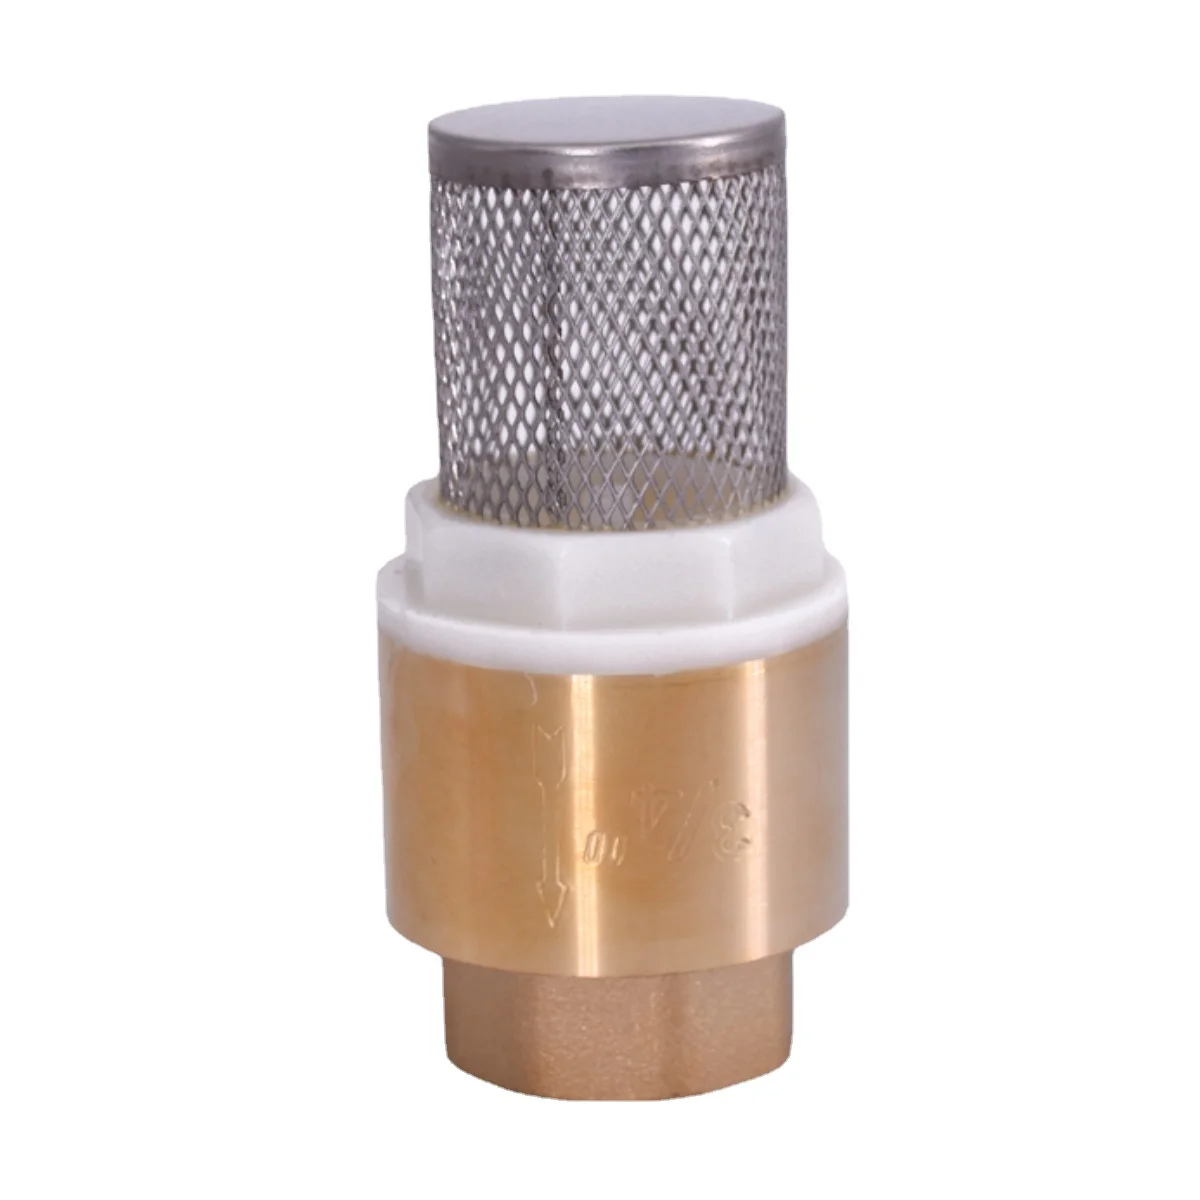 

1/2" 3/4" 1" 1-1/4" 1-1/2" 2" 2-1/2" 3" BSP Female Brass Check Valve Non-return With Steel Strainer Filter For Water Plumbing